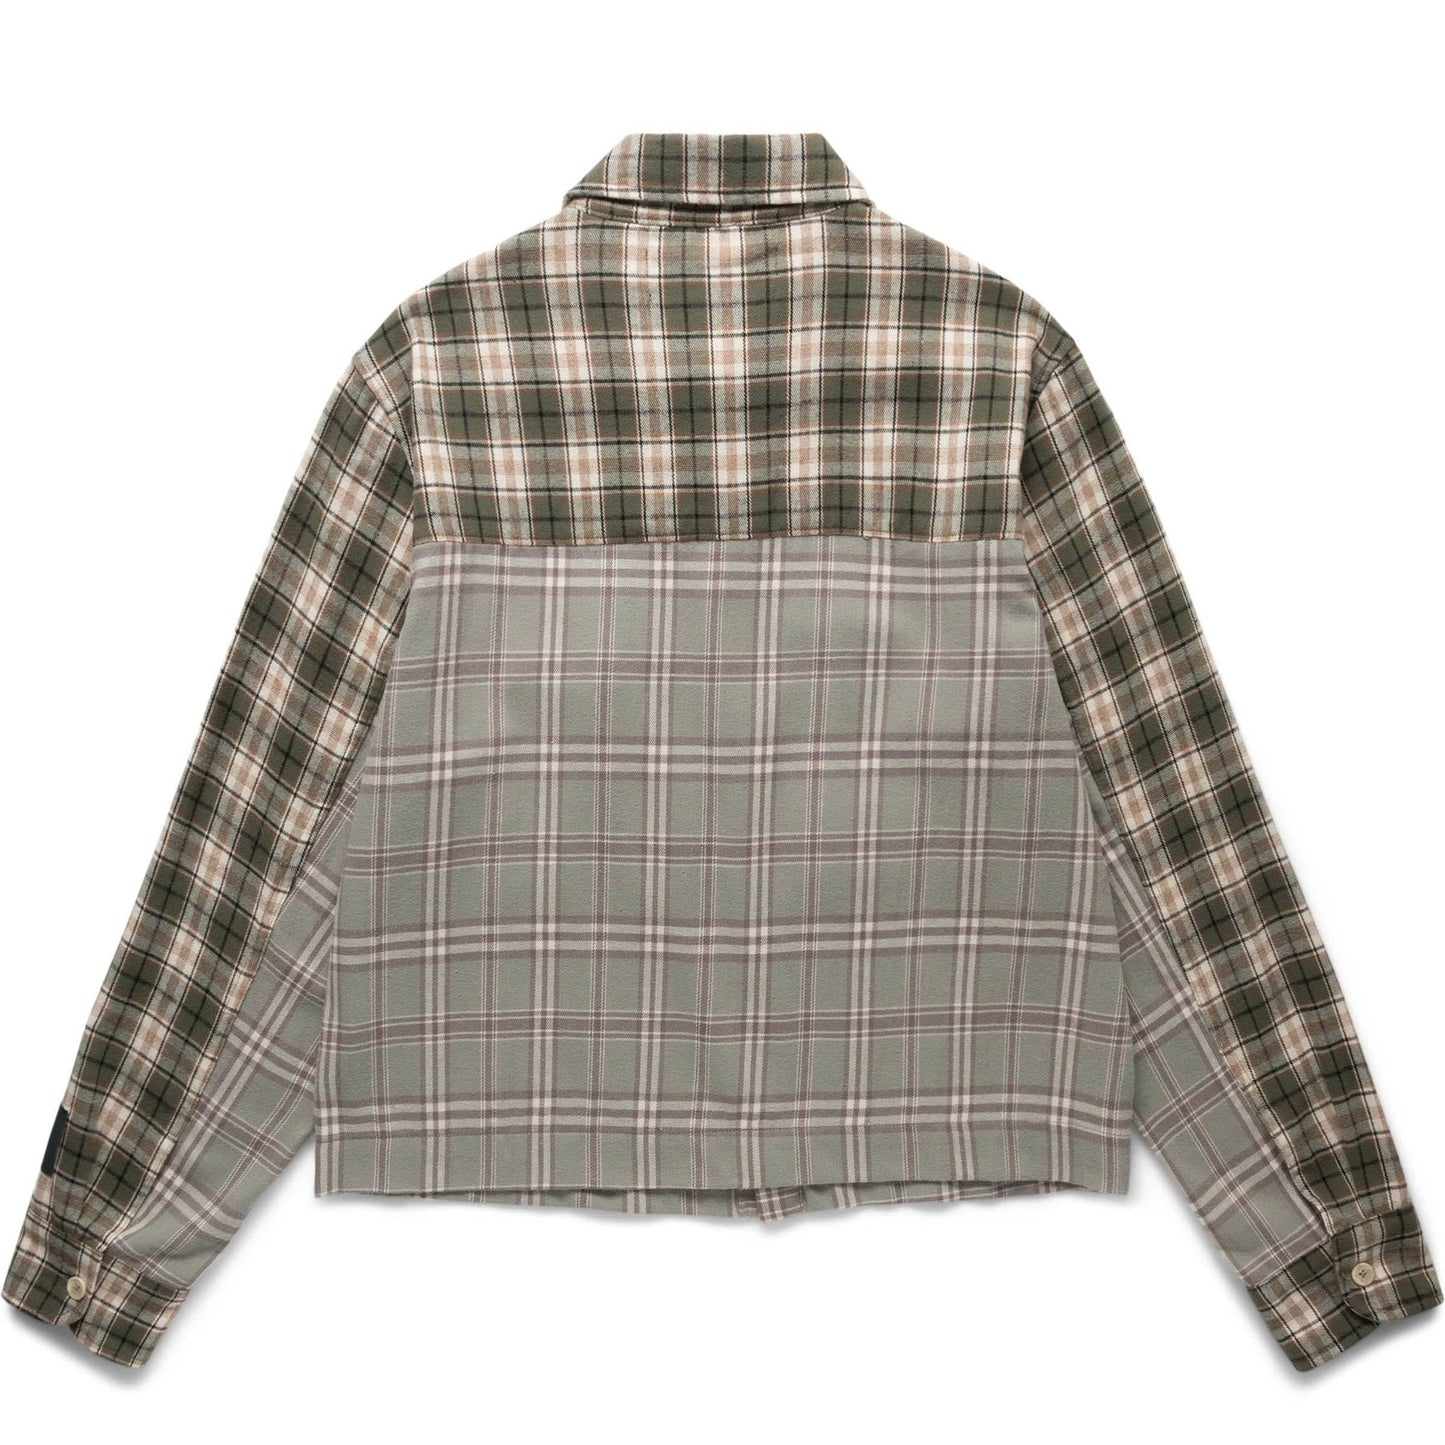 Reese Cooper Shirts CROPPED SPLIT FLANNEL SHIRT